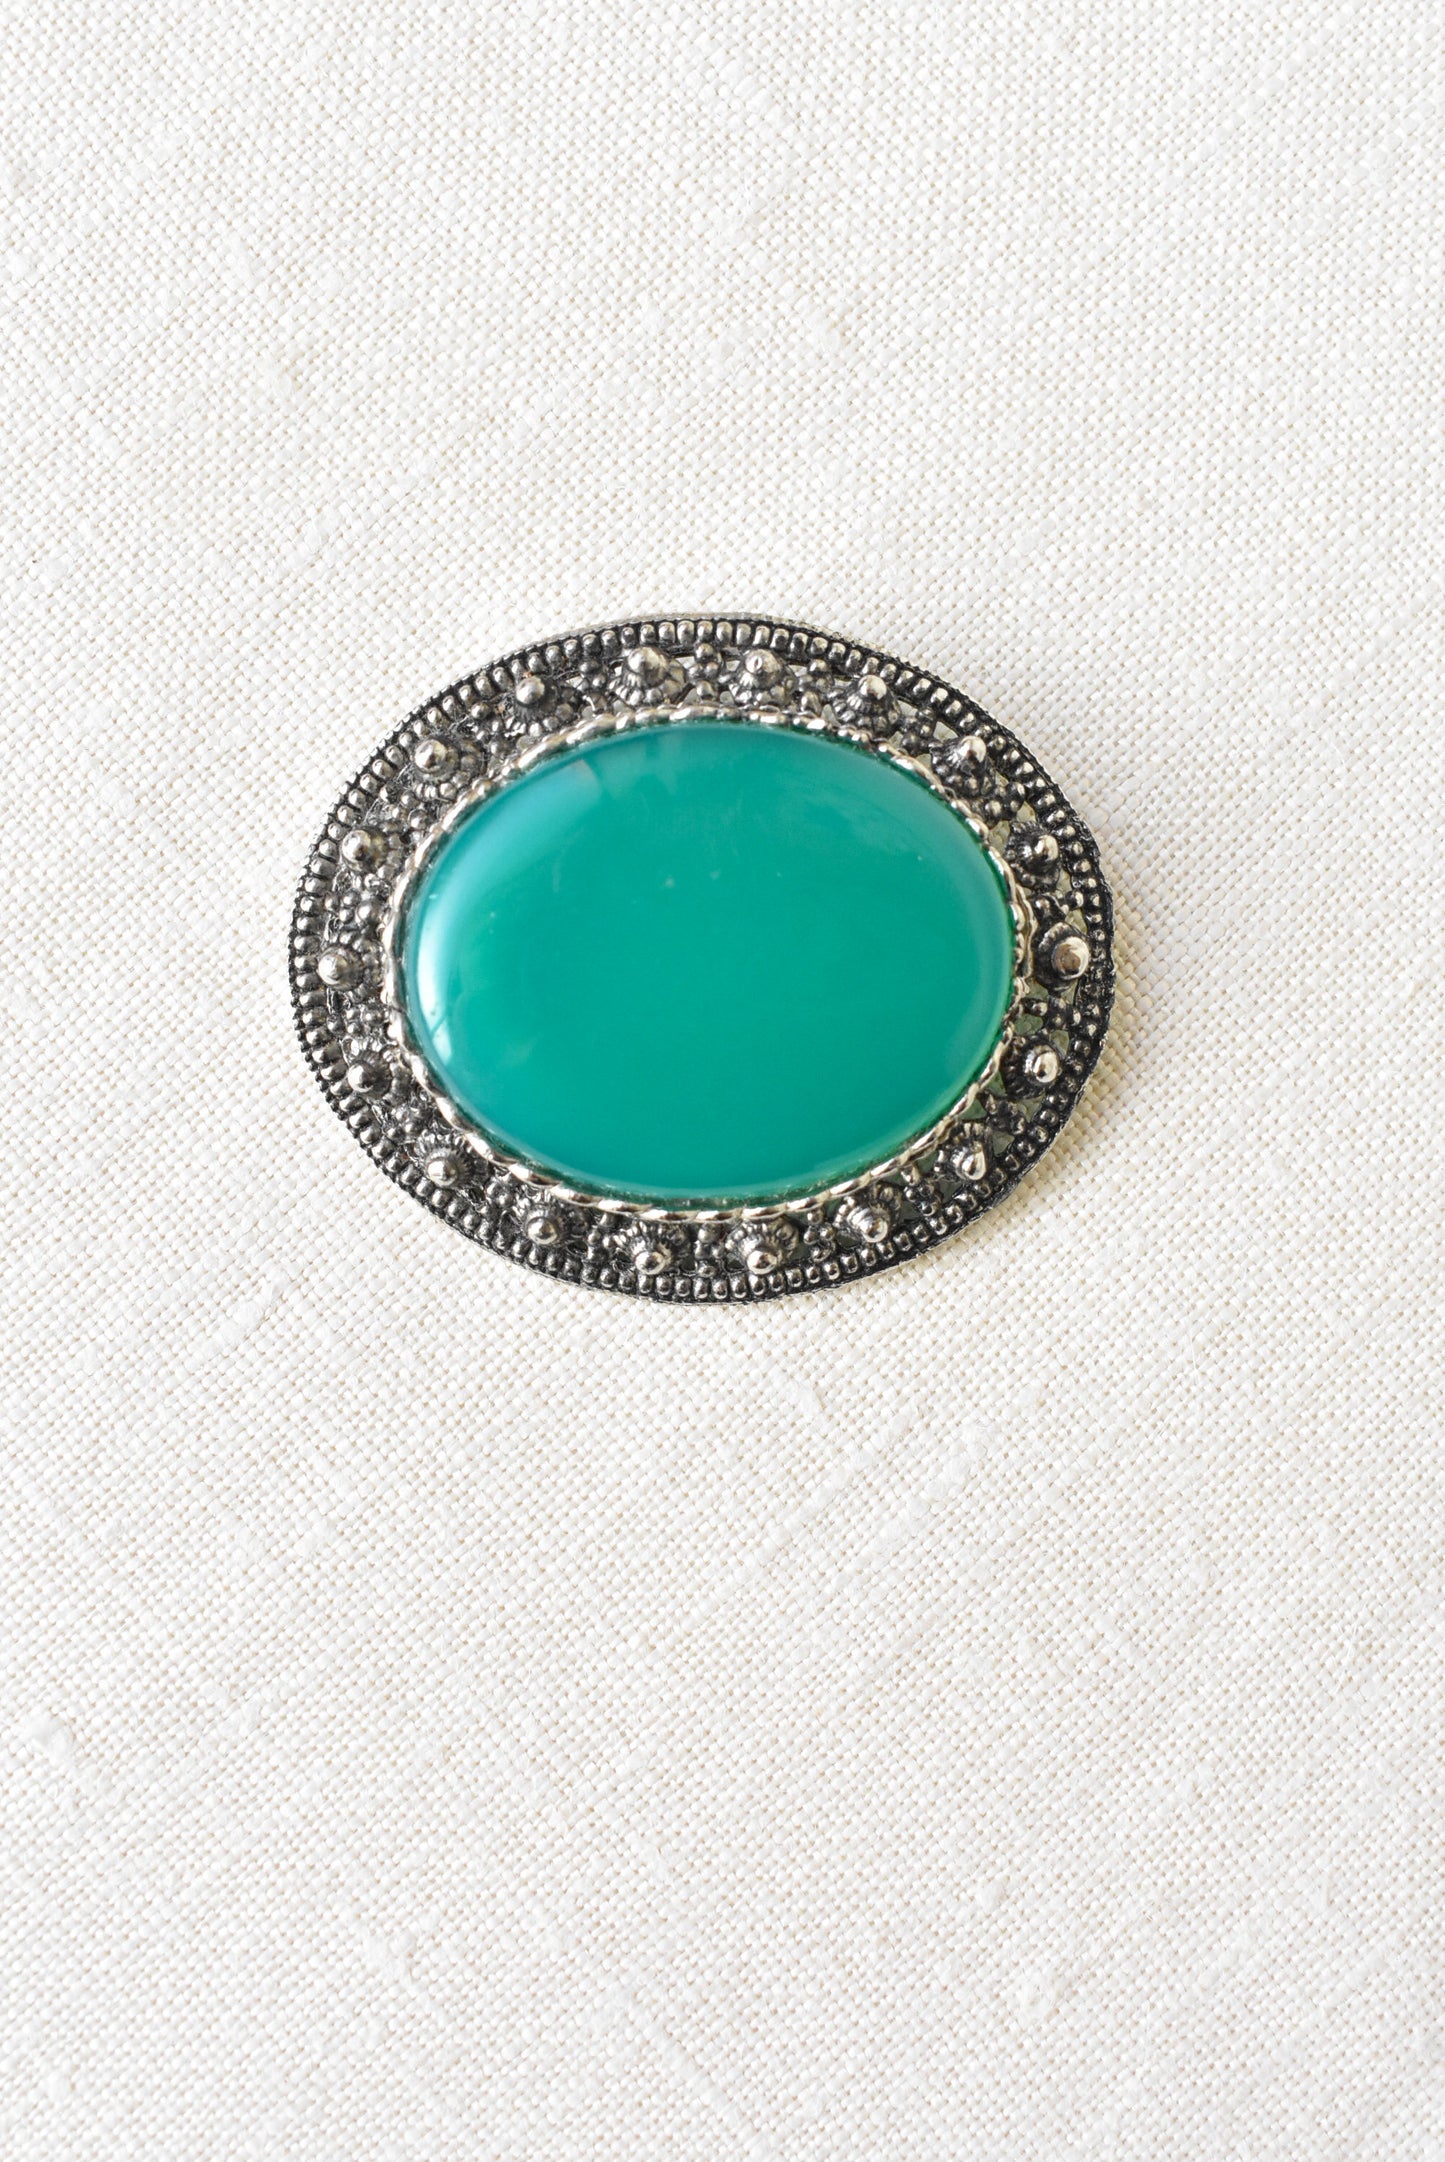 Silver and emerald brooch